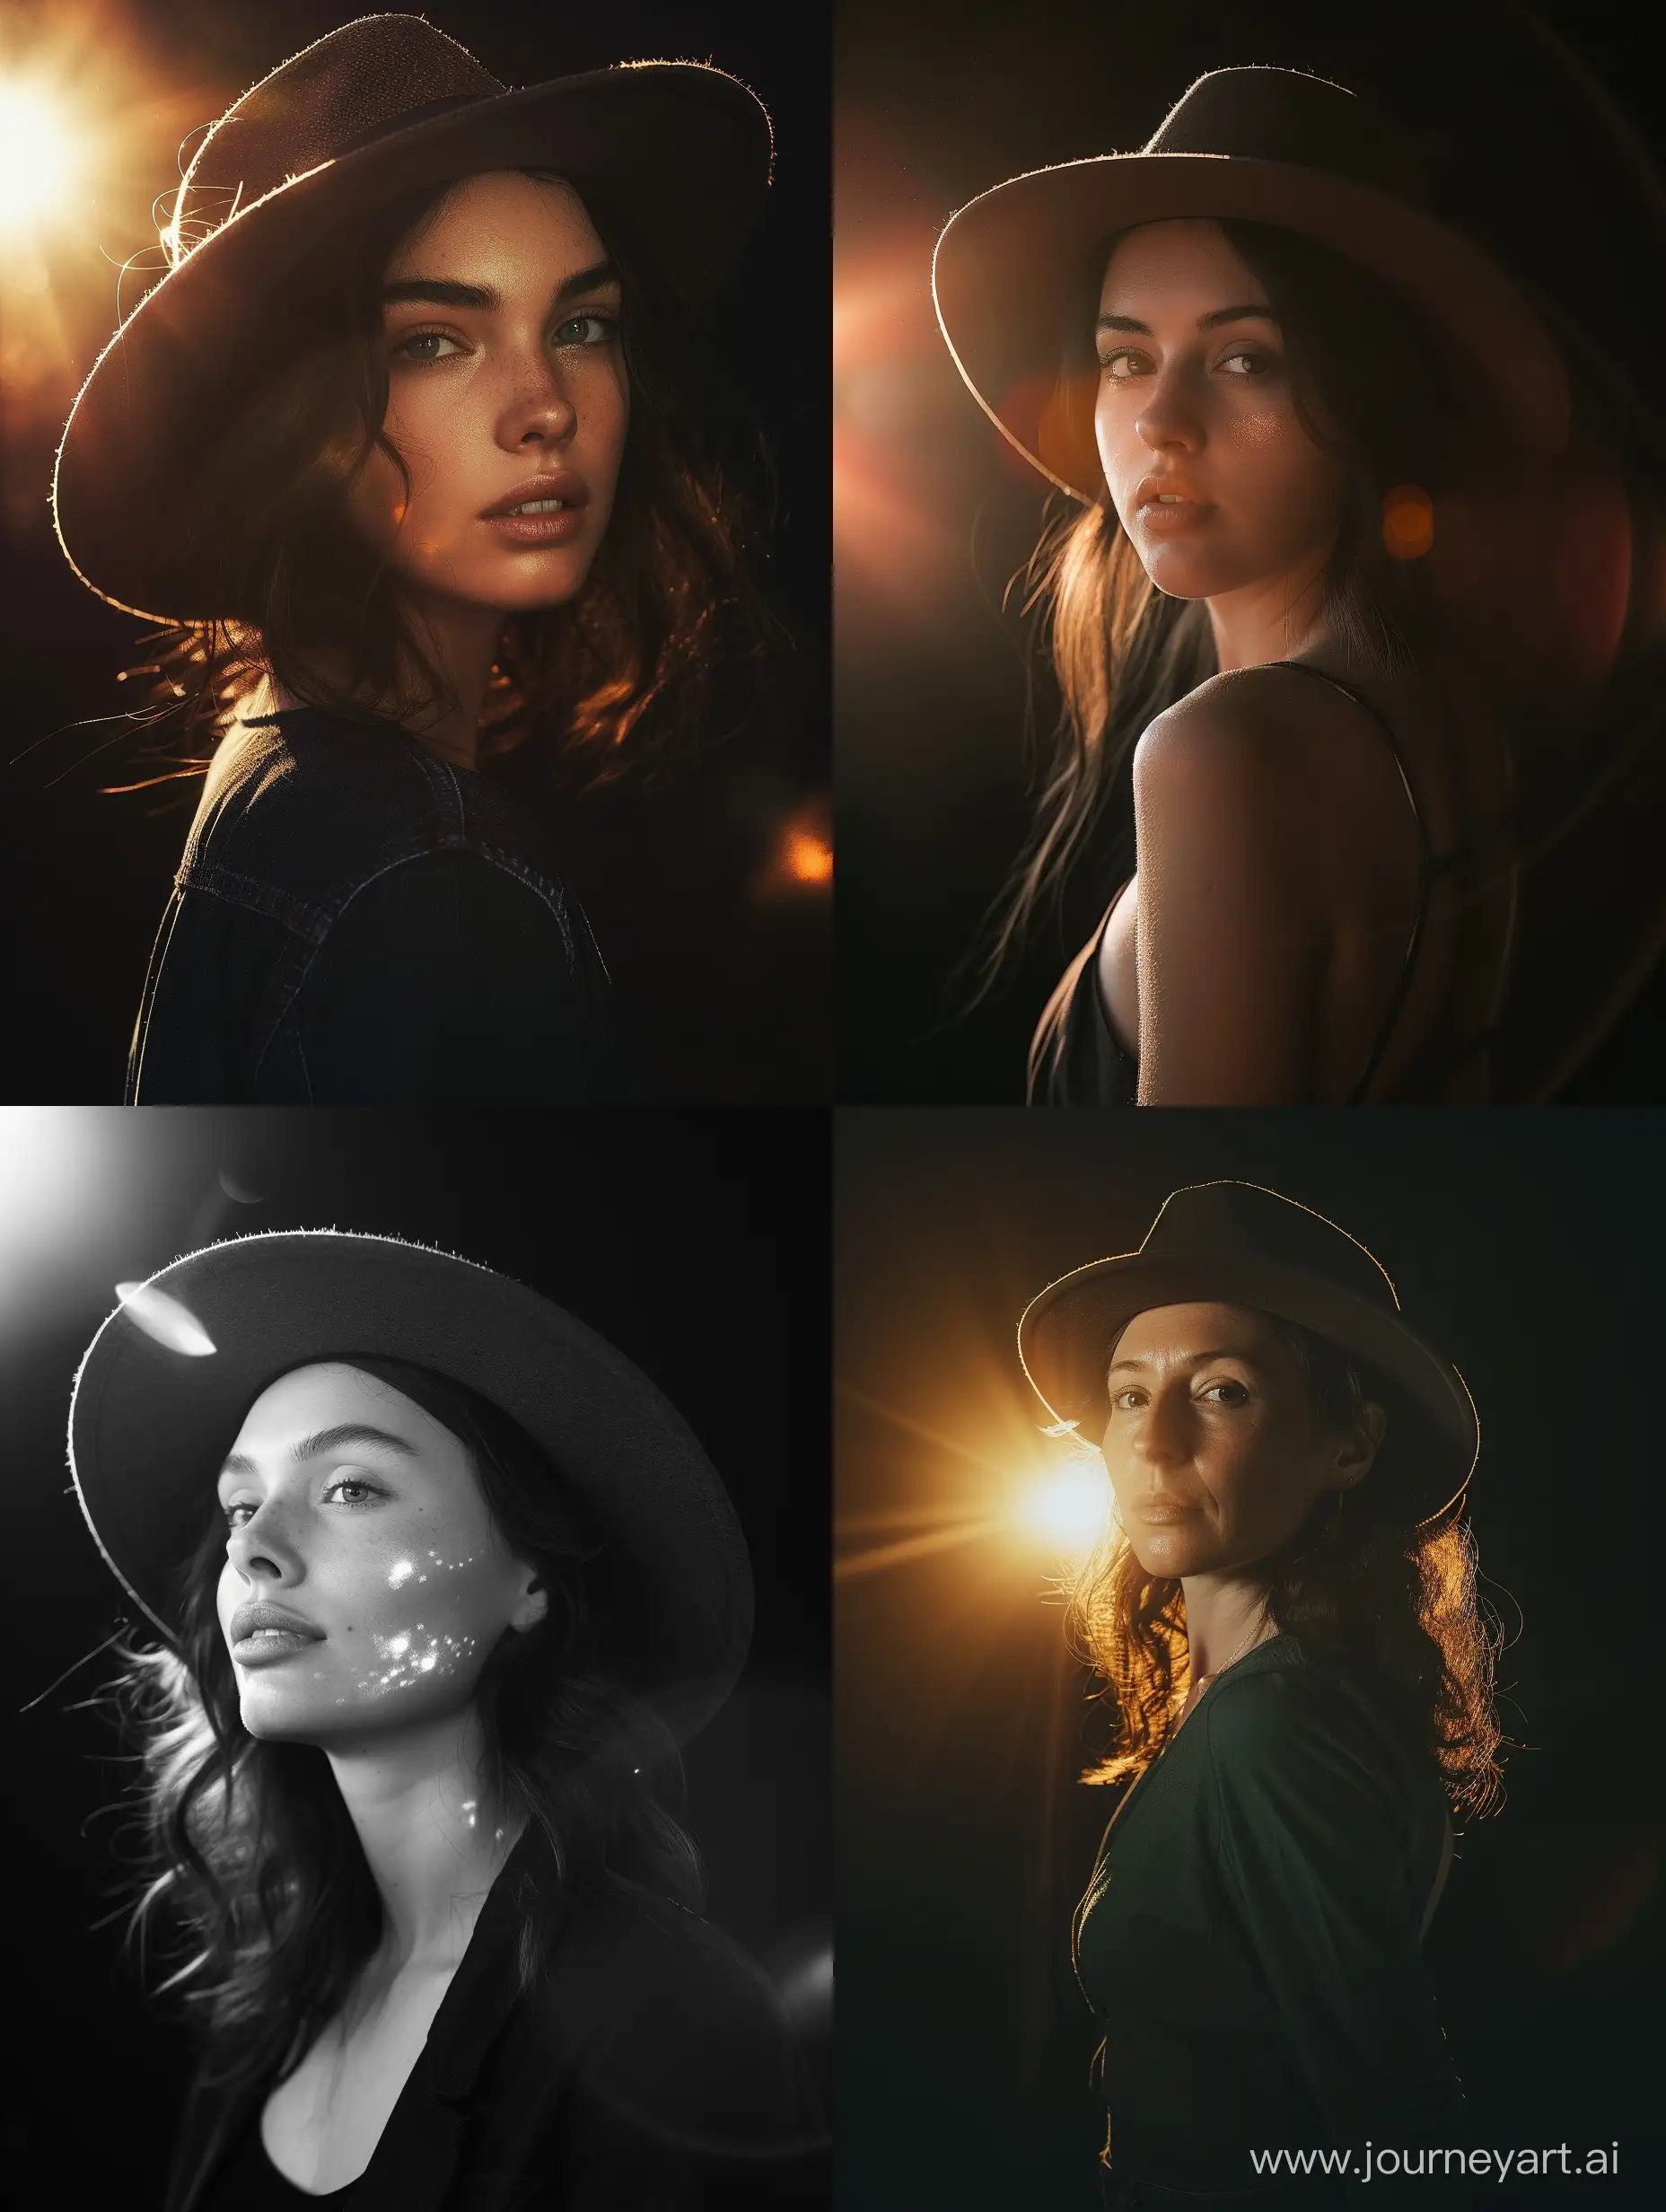 Elegant-Woman-Portrait-with-Hat-Soft-Light-and-Warm-Backlighting